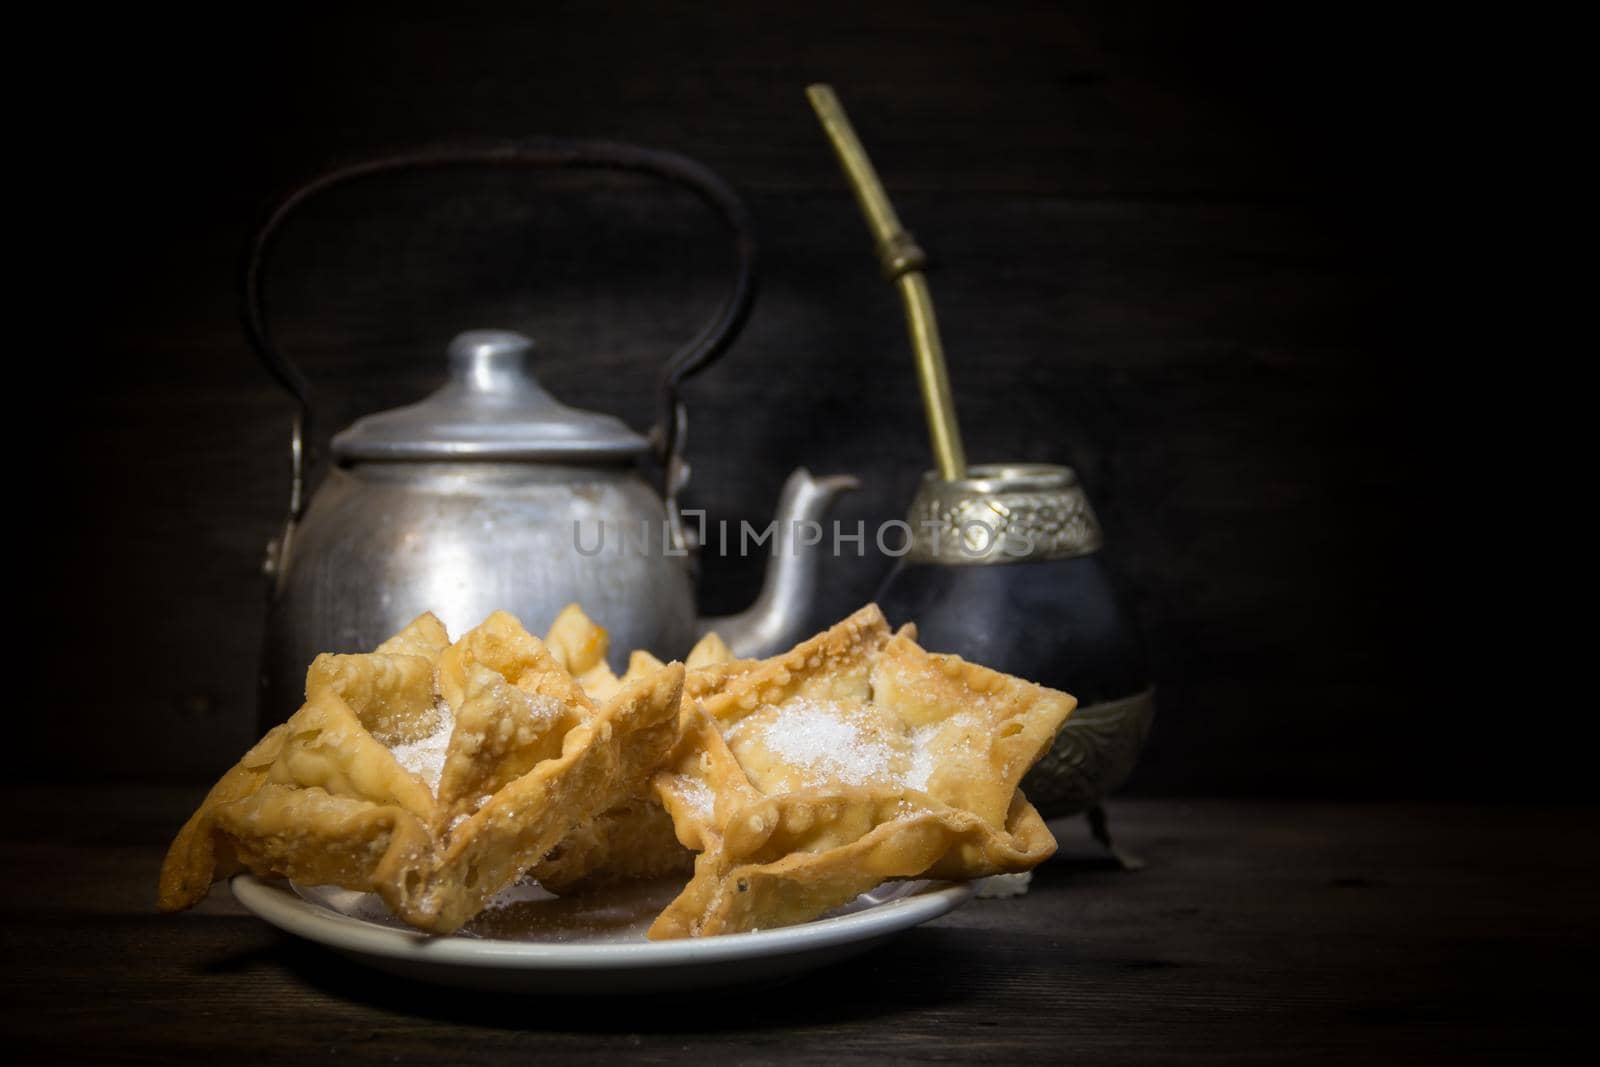 Plate of fried quince and sweet potato pastries with mate.Gastrnomia Argentina